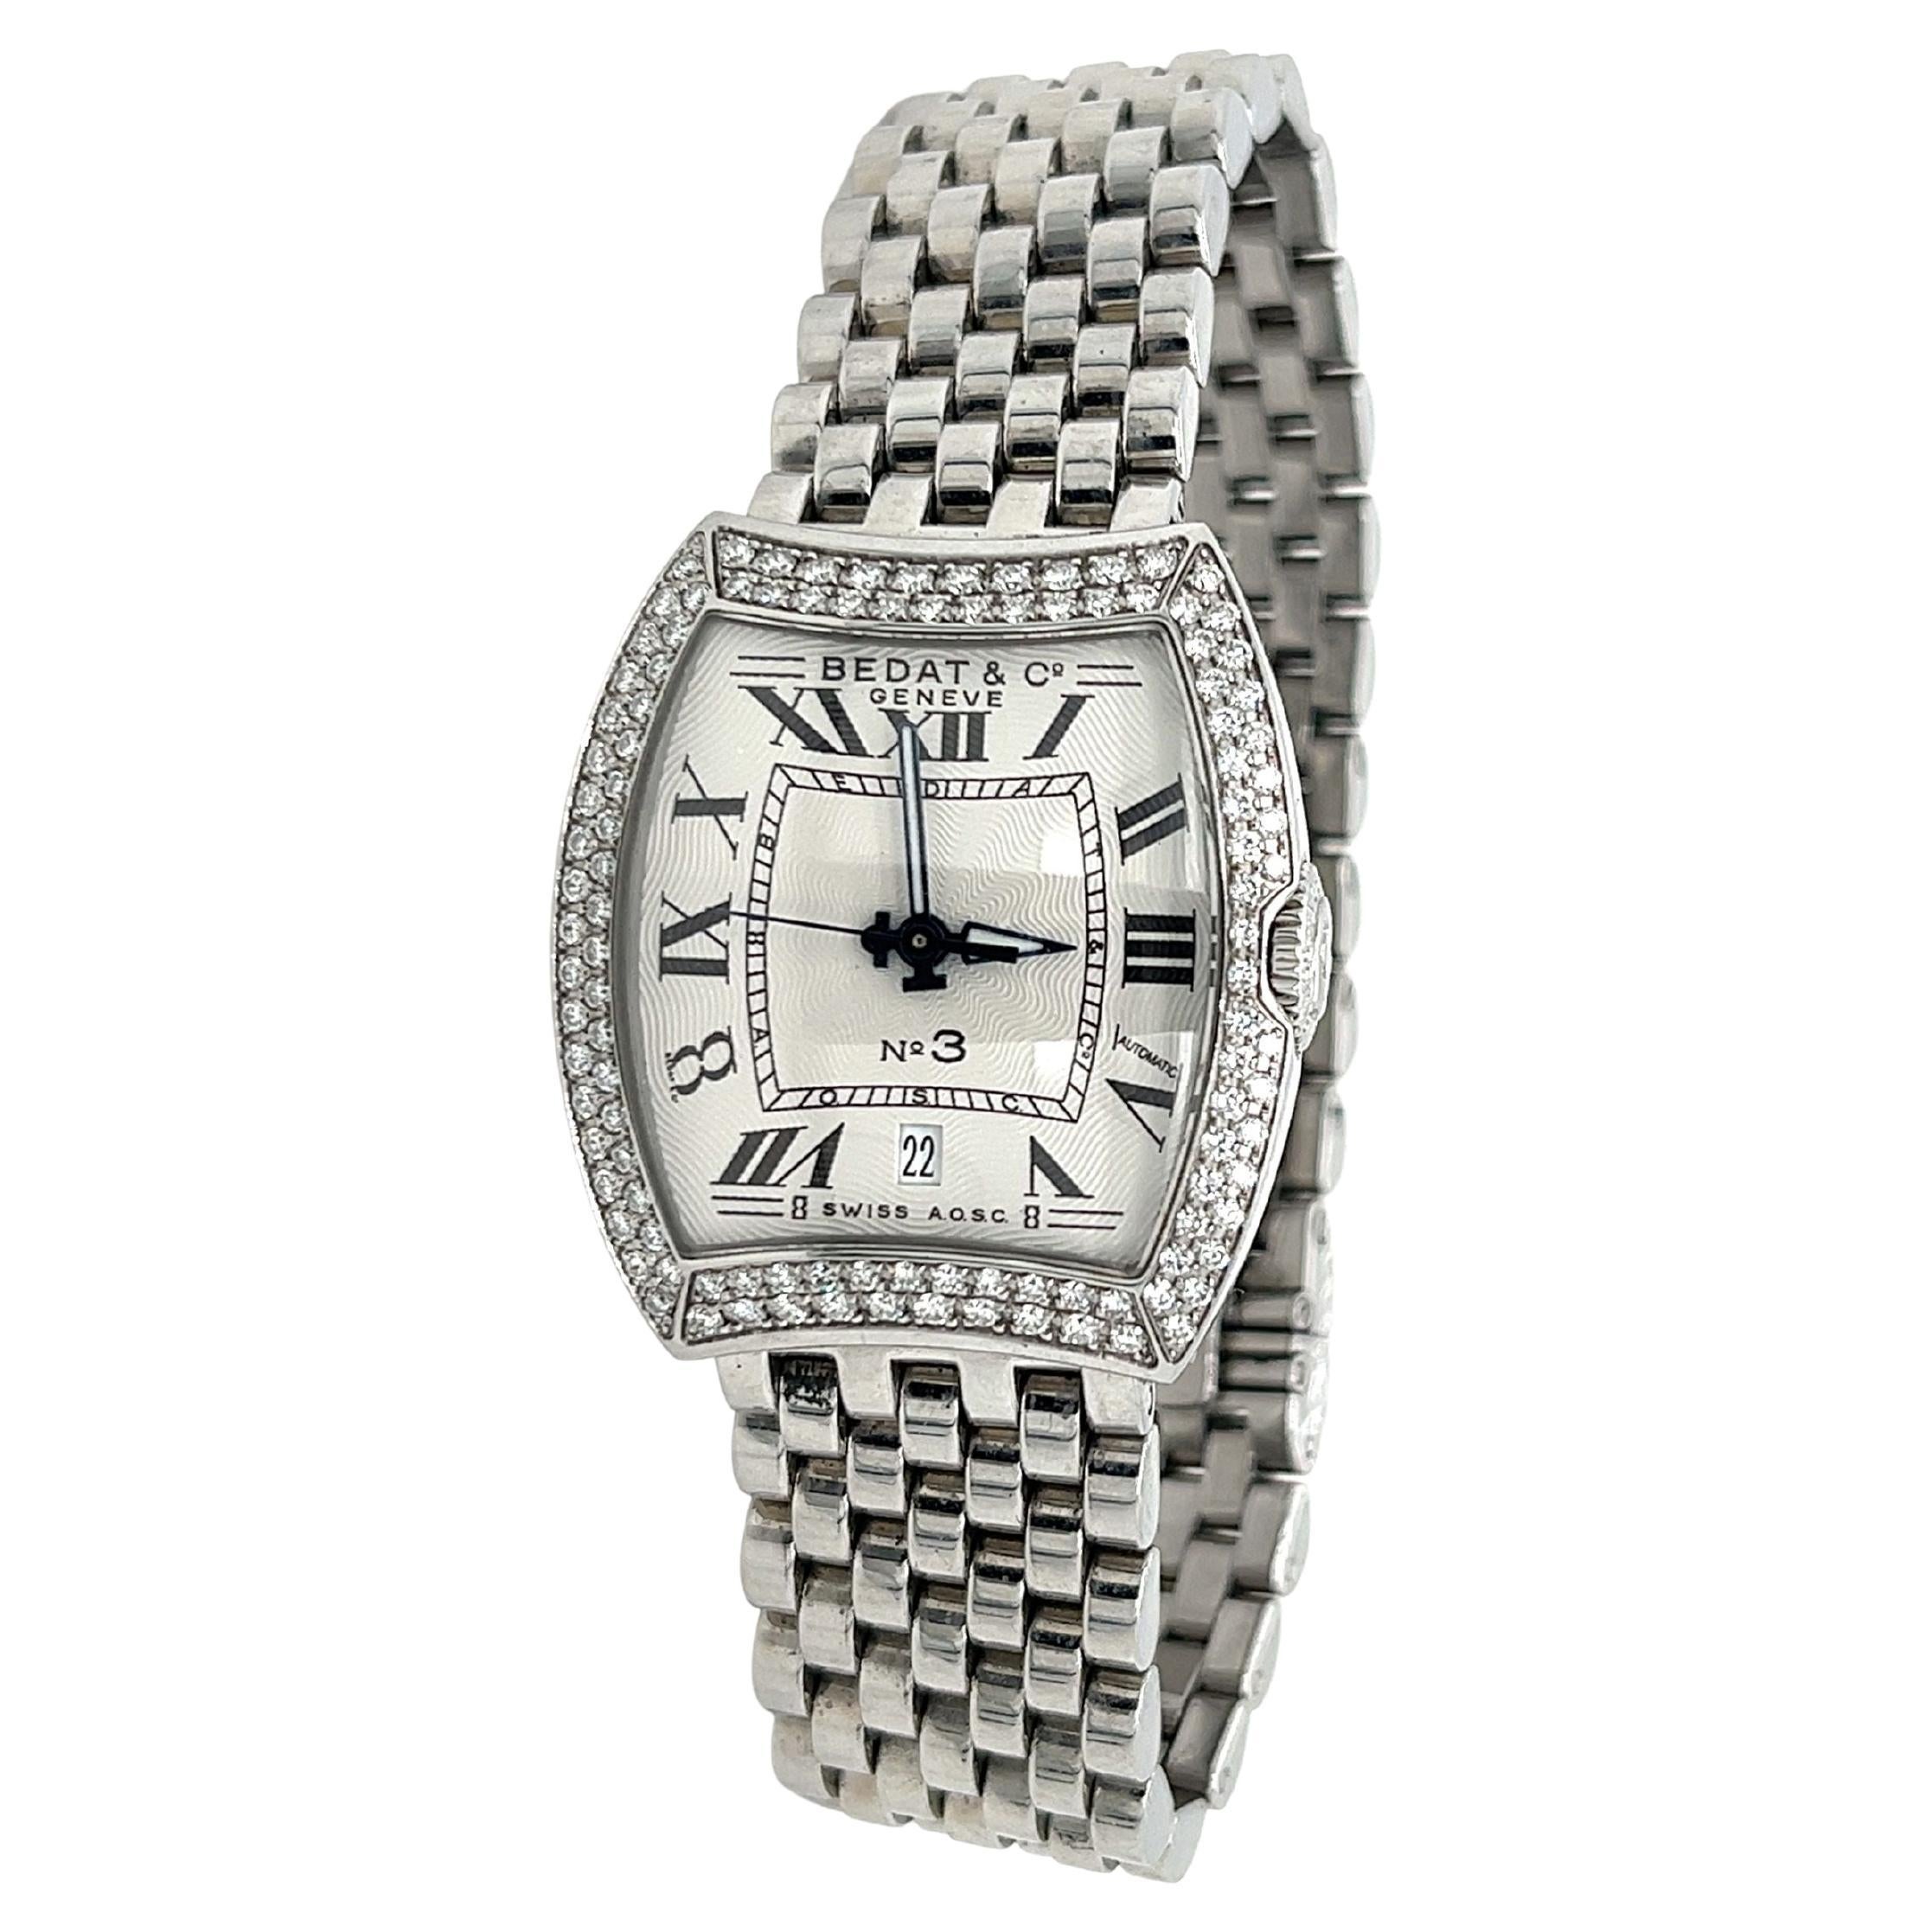 Bedat & Co Ladies Watch with Diamond Bezel Ref 314 No. 3 Automatic Dial